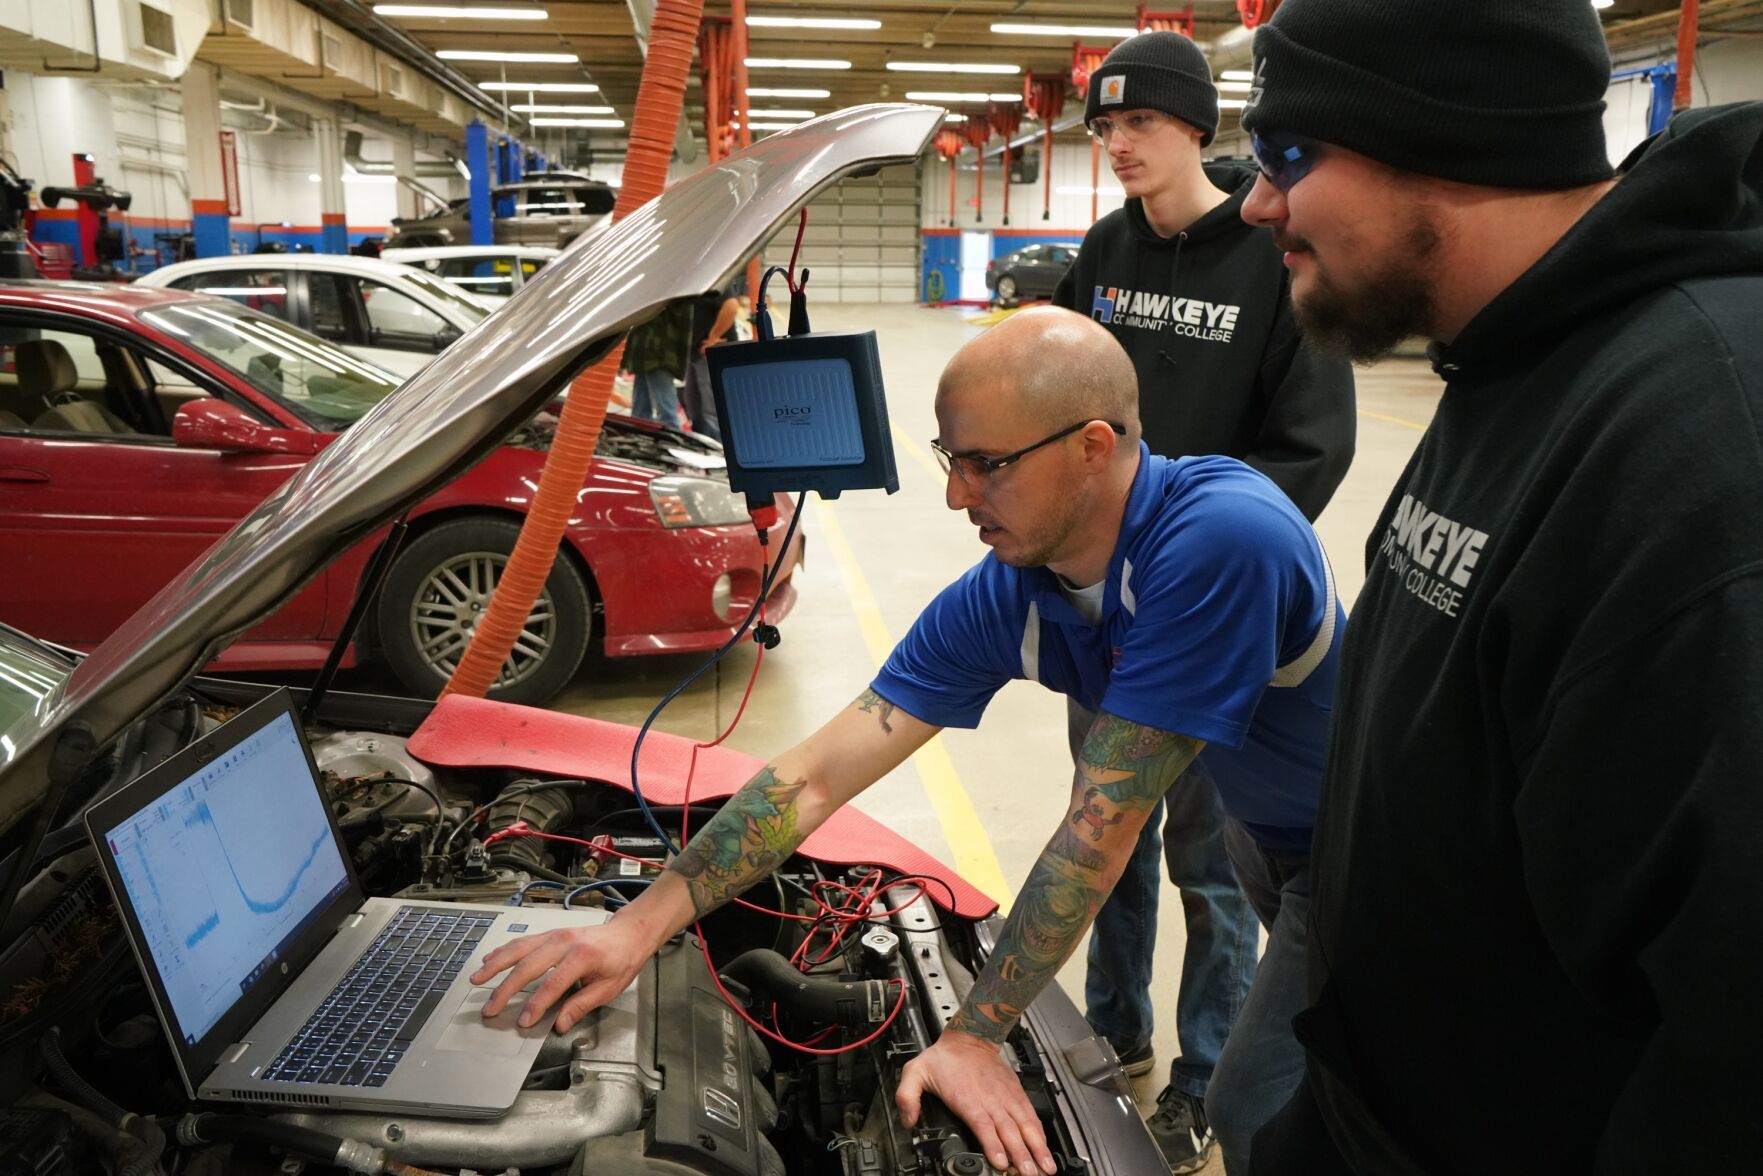 Instructor from HCC receives award for automotive technology education